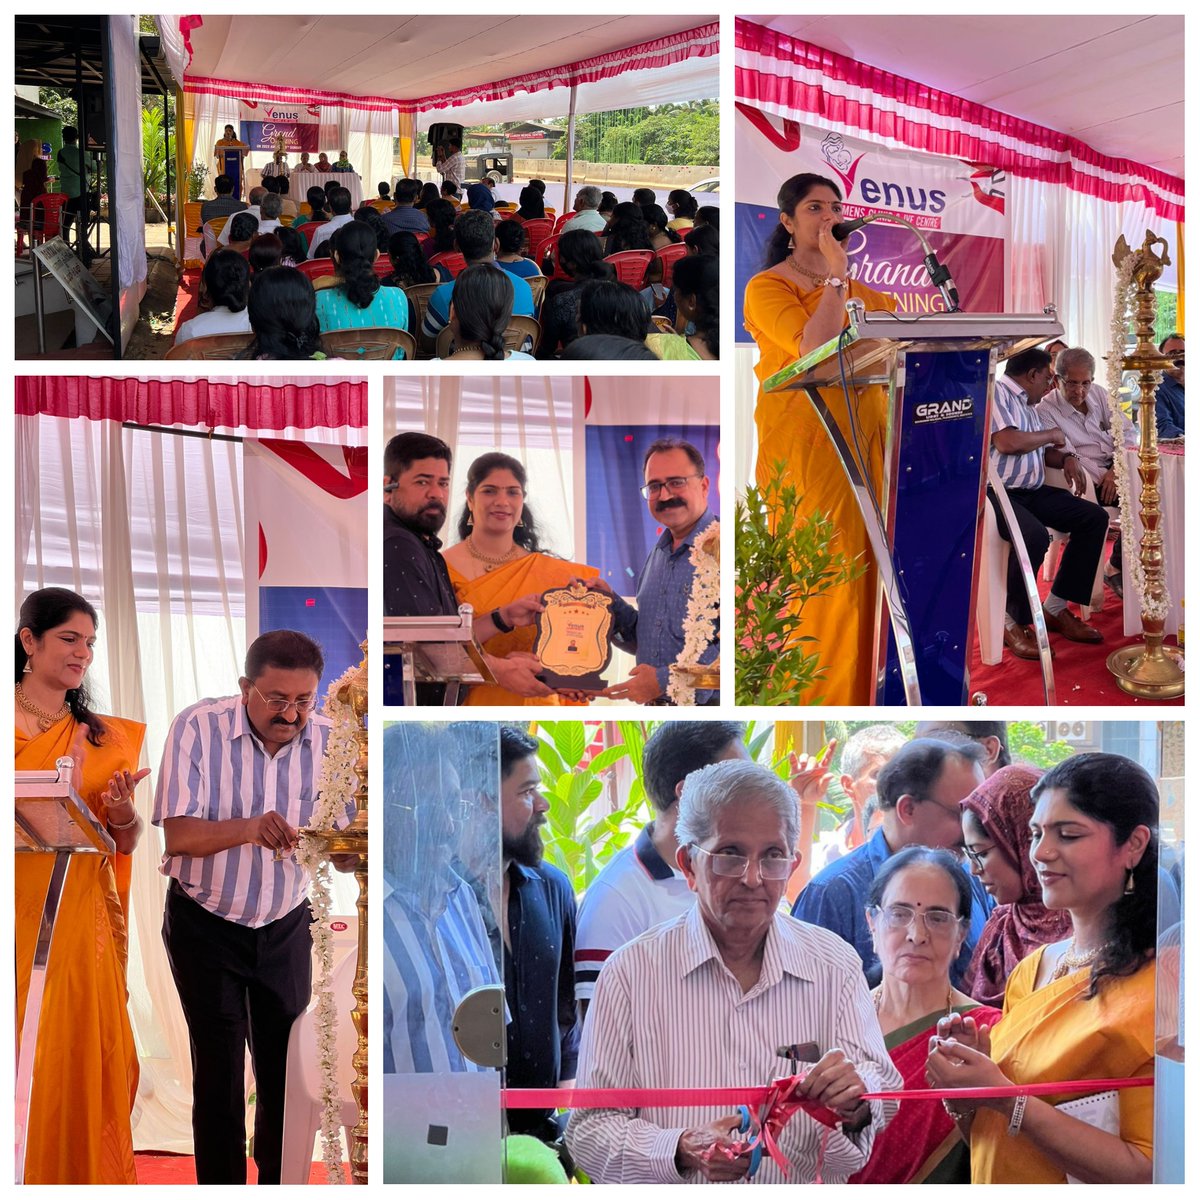 Inauguration Ceremony of Venus Women's Clinic & IVF Centre, Kasaragod

For Booking: 8281388334

#ivfcentre #womensclinic #womens #sexualproblem #pregnancy #Kasaragod #cosmetology